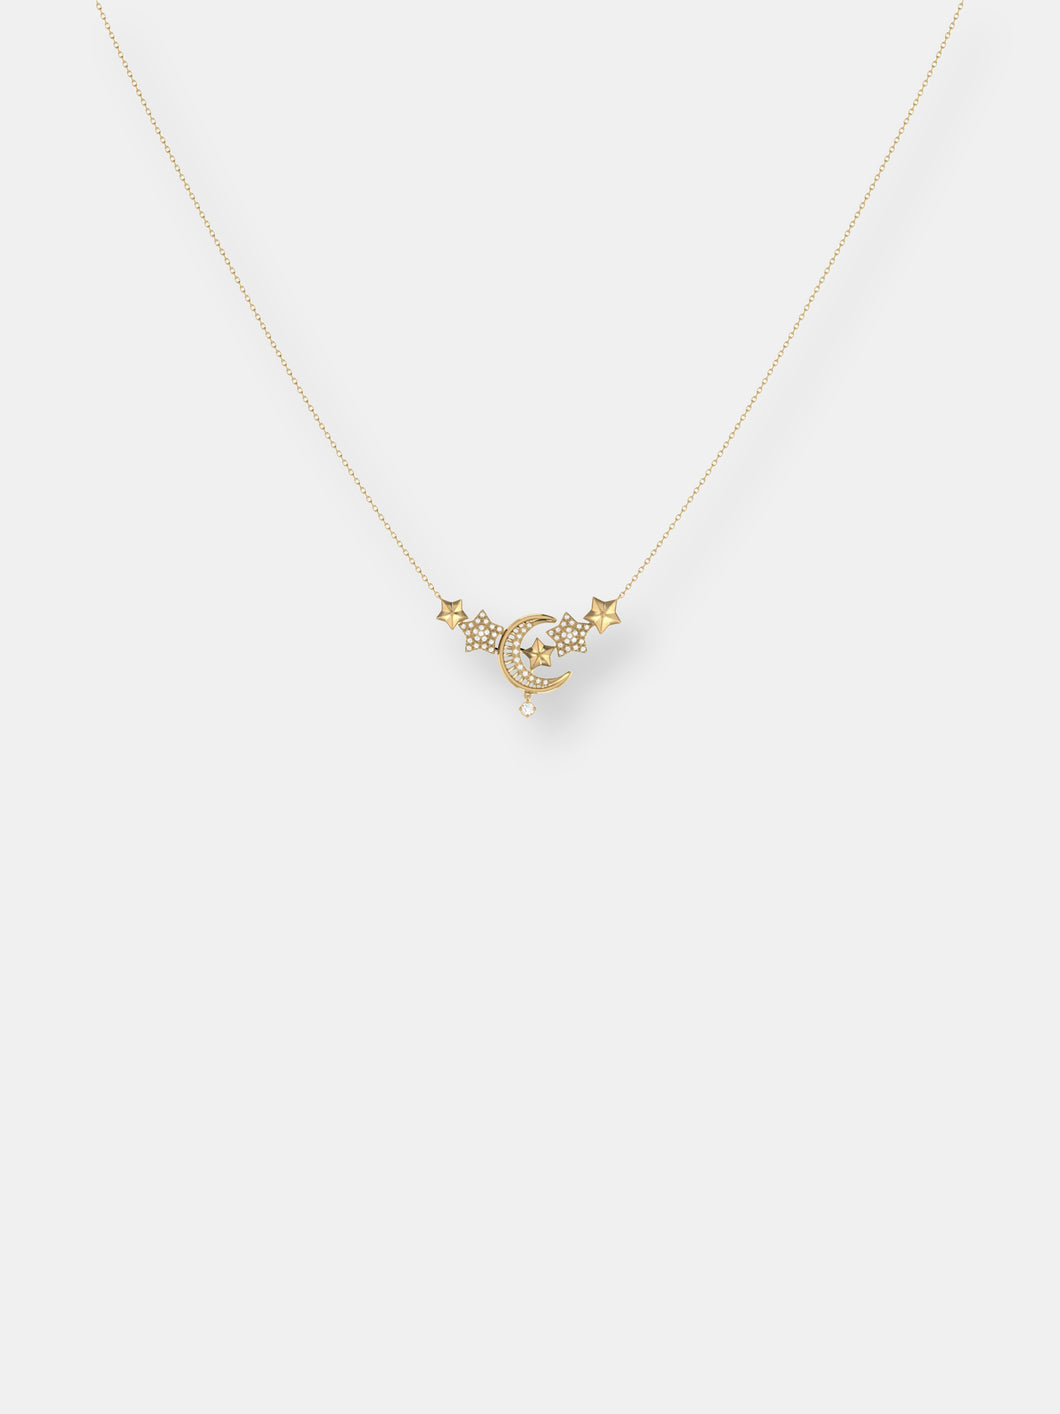 Star Cluster Moon Crescent Diamond Necklace In 14K Yellow Gold Vermeil On Sterling Silver